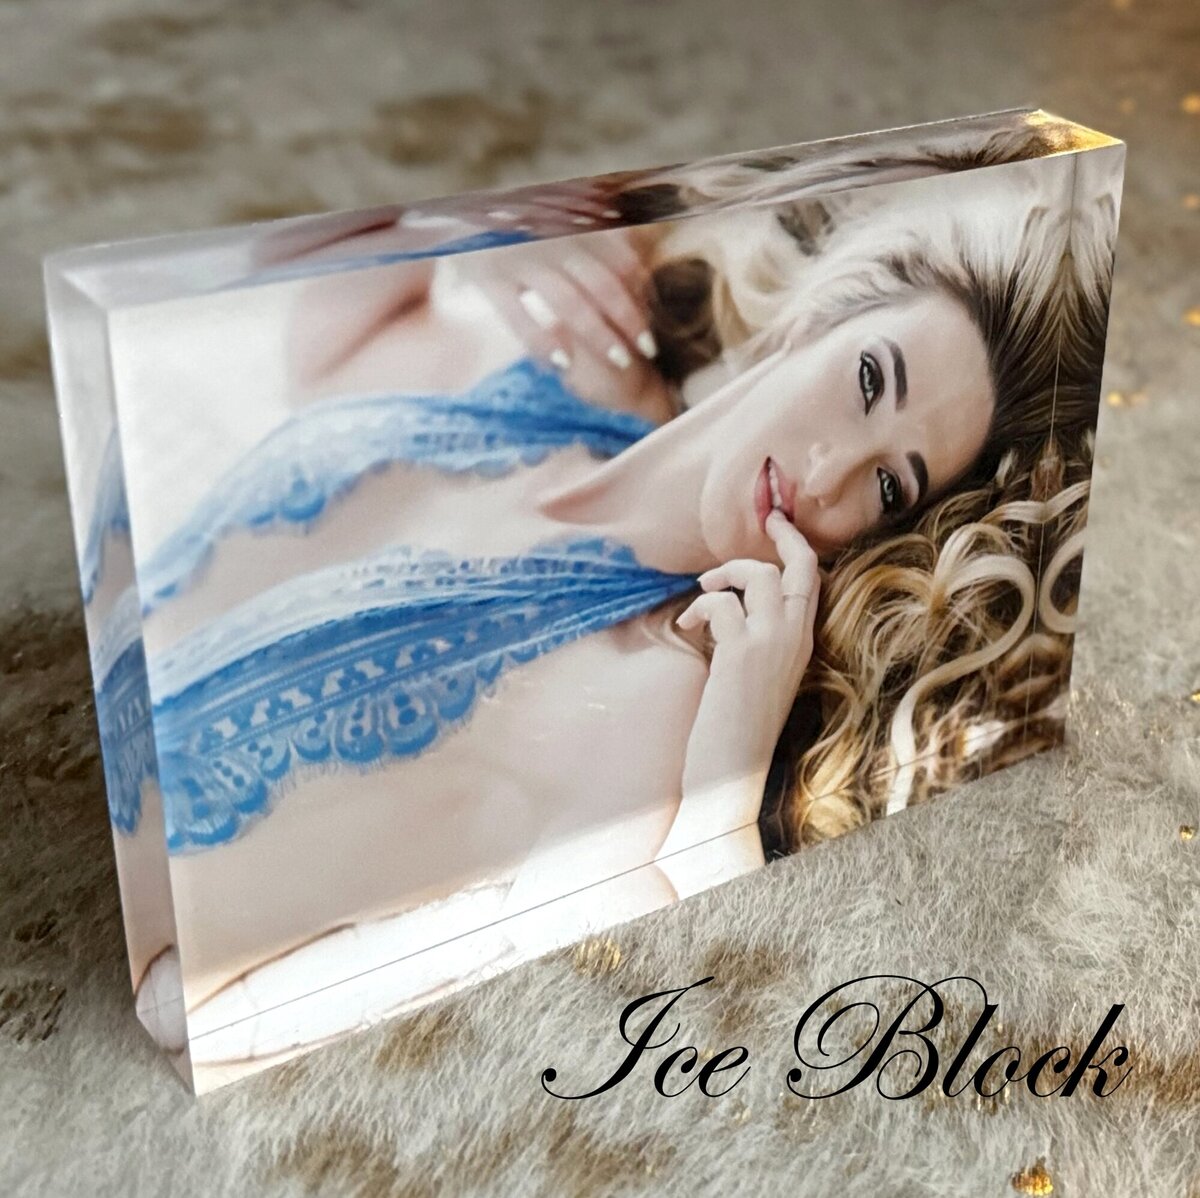 5x7 Ice Block of a woman with blonde hair in blue lingerie